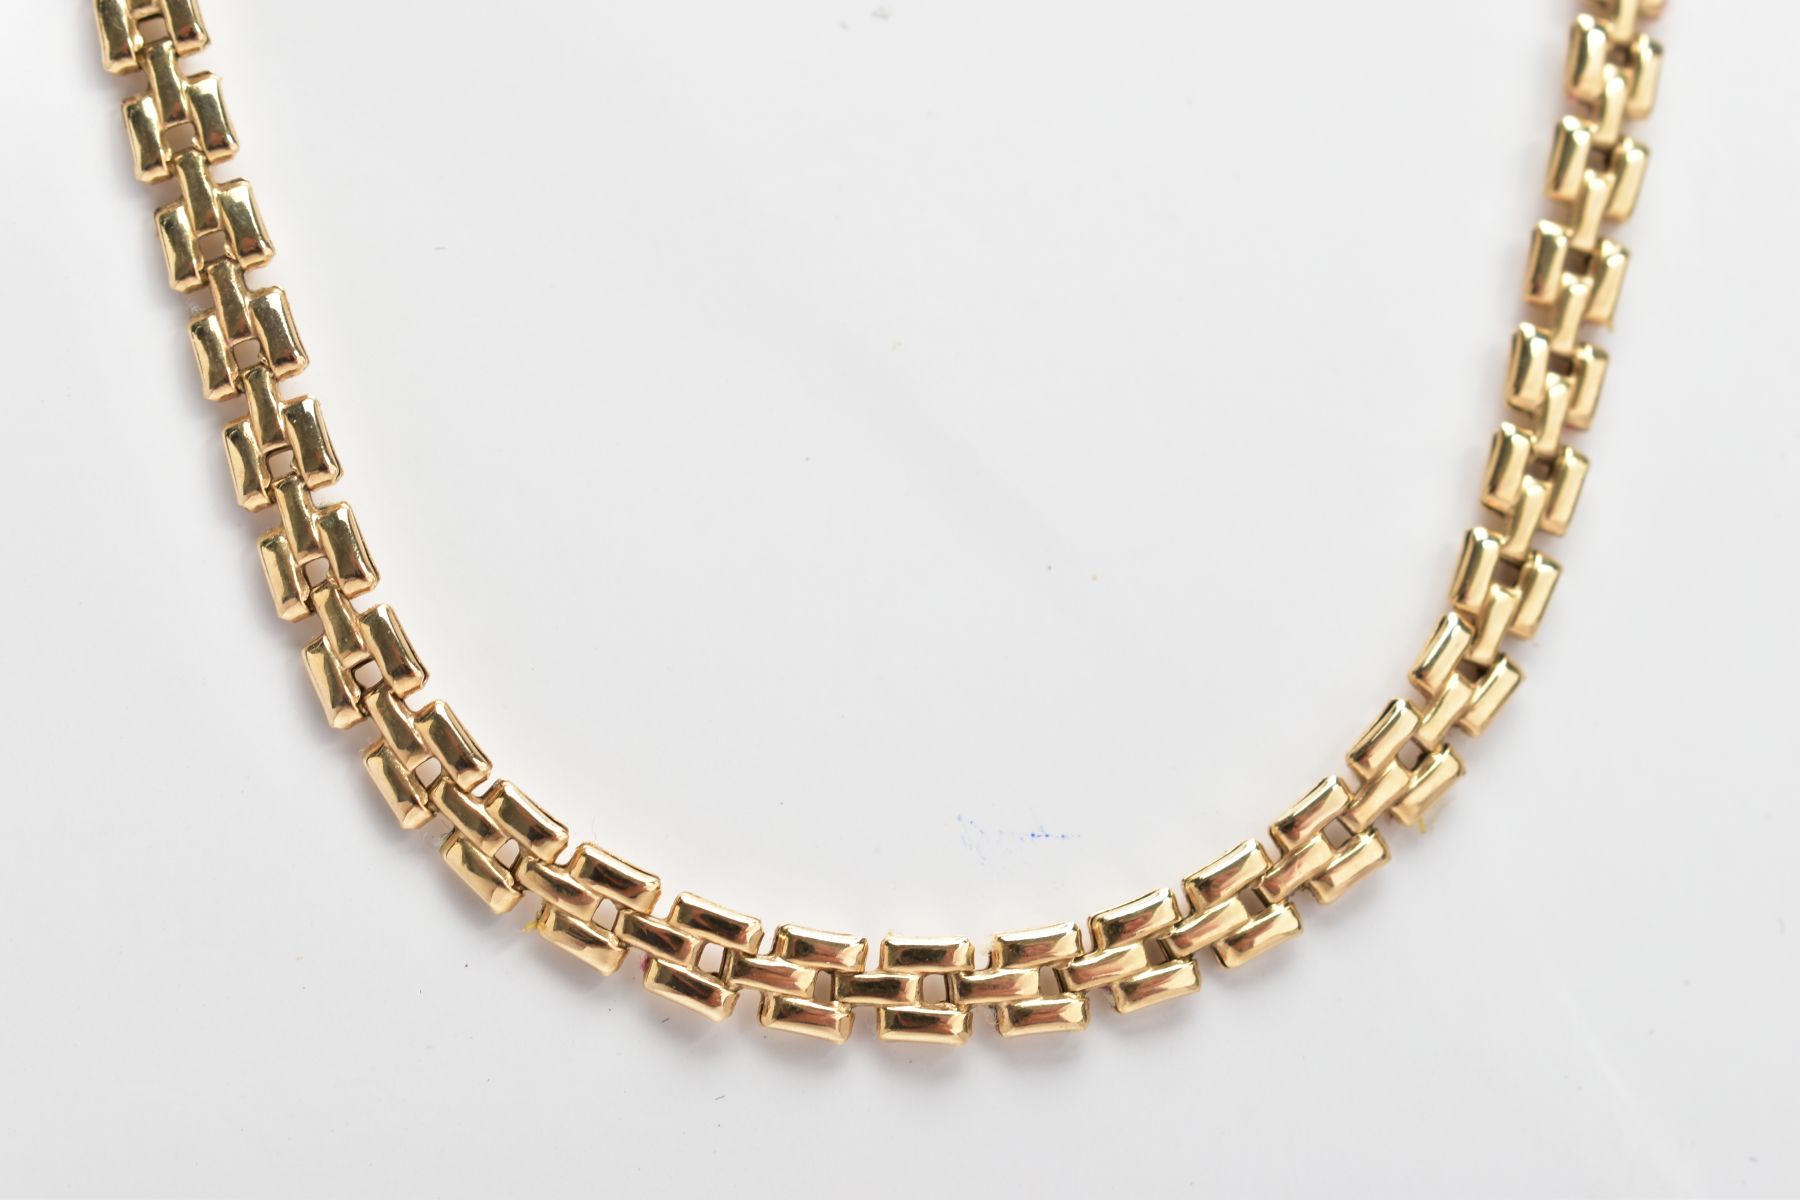 A 9CT GOLD BRICK LINK CHAIN, fitted with a lobster claw clasp, hallmarked 9ct gold Sheffield import, - Image 3 of 3